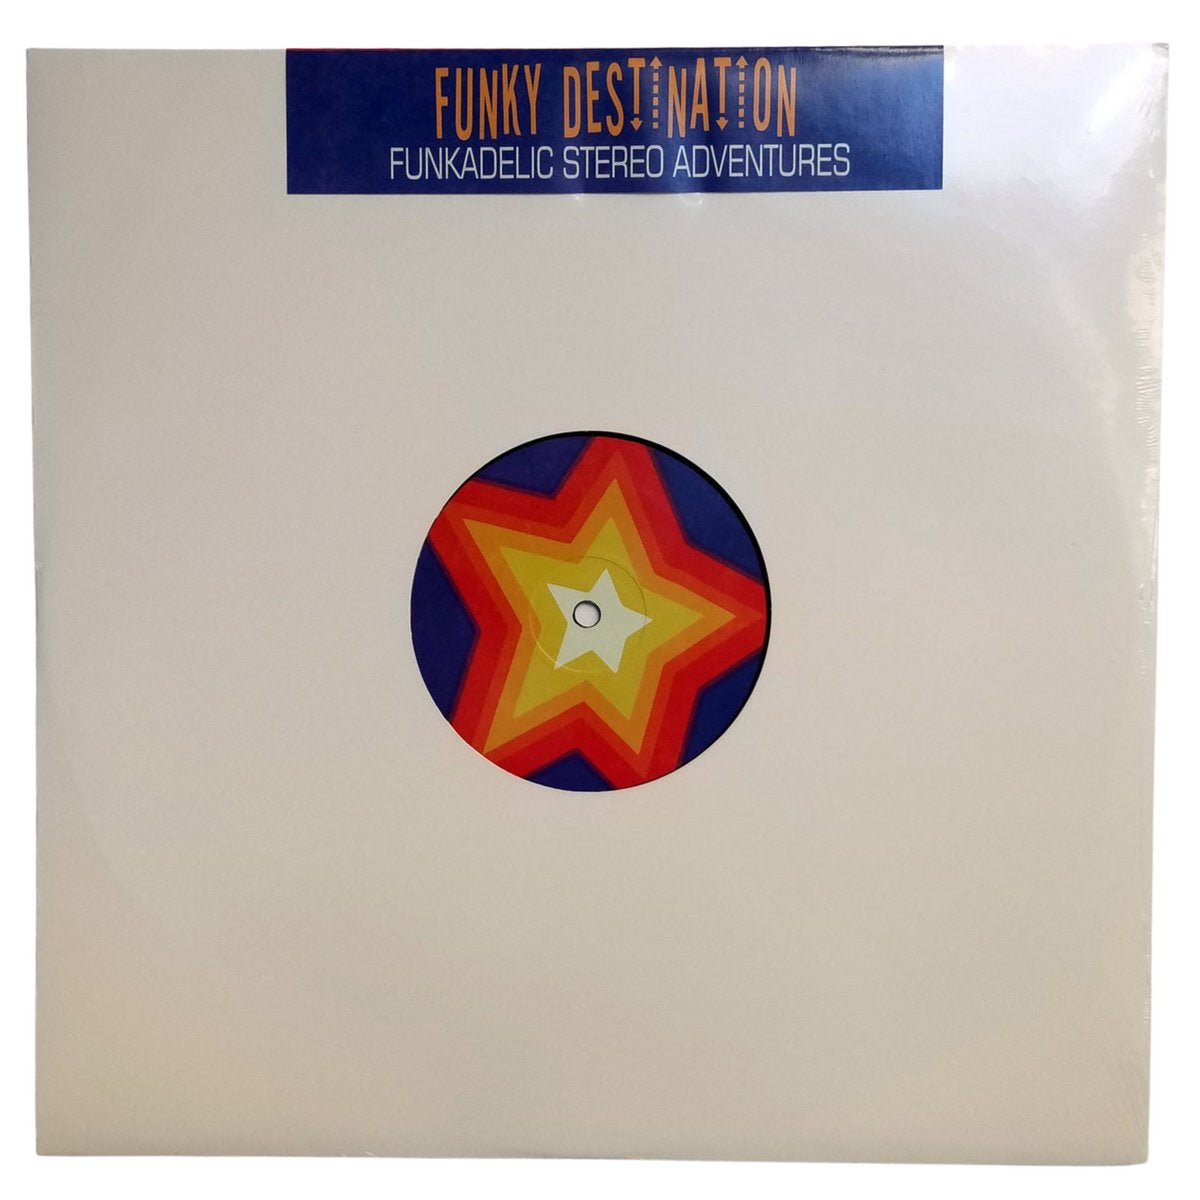 Funky Destination - Funkadelic Stereo Adventures - Limited Edition 12 Inch Vinyl - Cold Busted